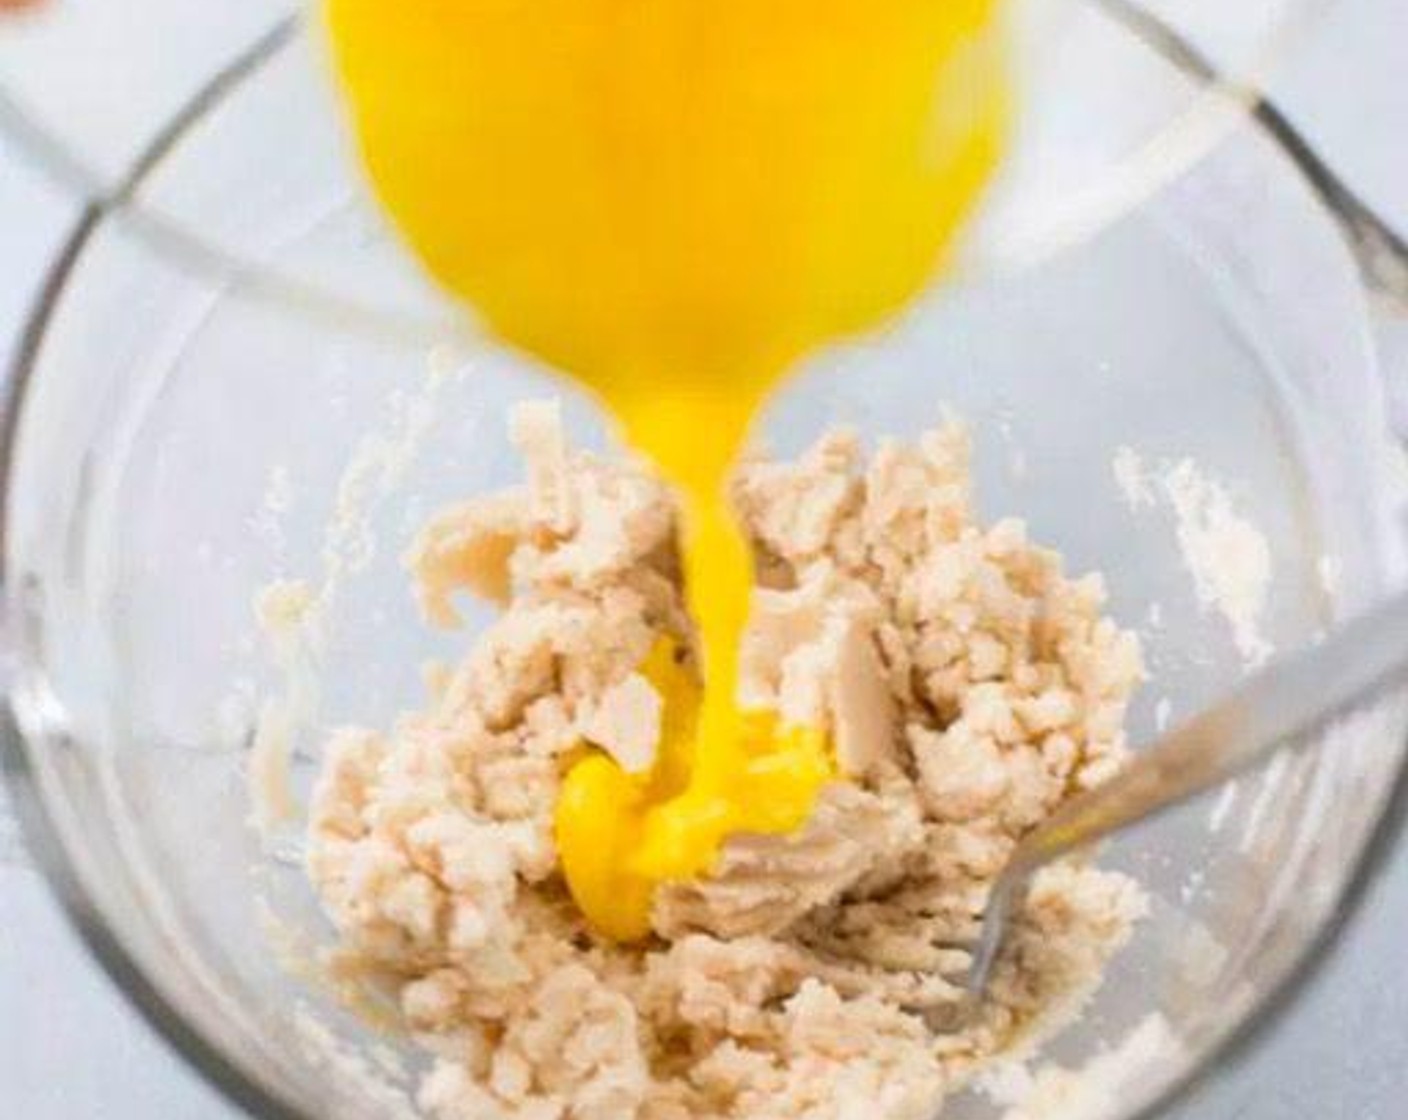 step 4 Mix the Distilled White Vinegar (1/2 tsp) with the Egg (1). Pour egg mixture into dough mixture and combine with your hands until a ball forms.